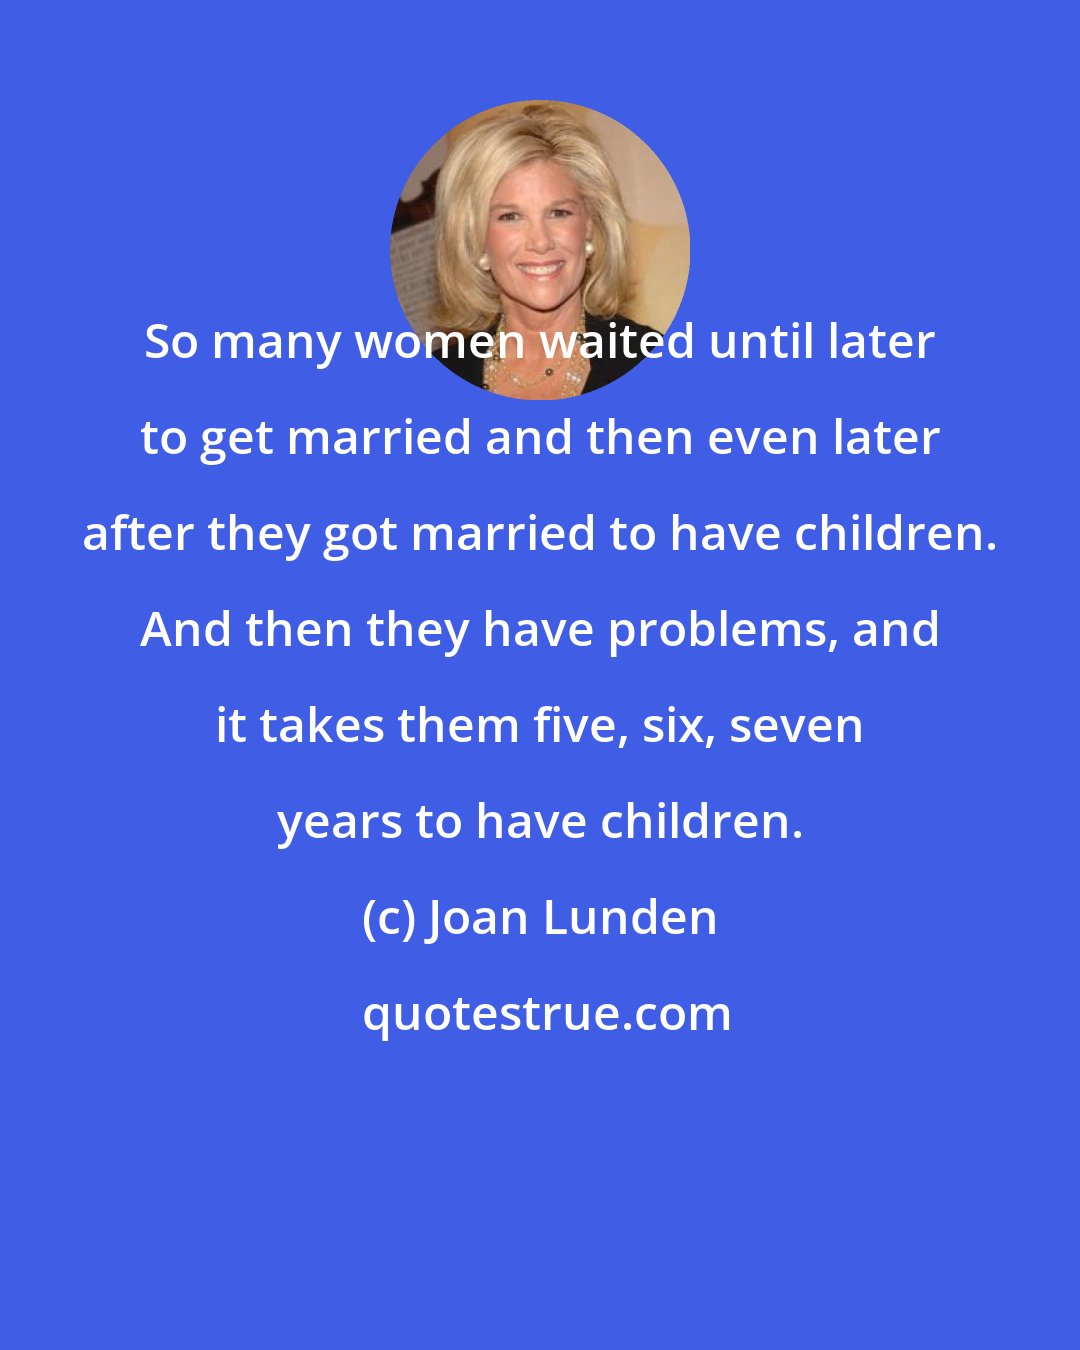 Joan Lunden: So many women waited until later to get married and then even later after they got married to have children. And then they have problems, and it takes them five, six, seven years to have children.